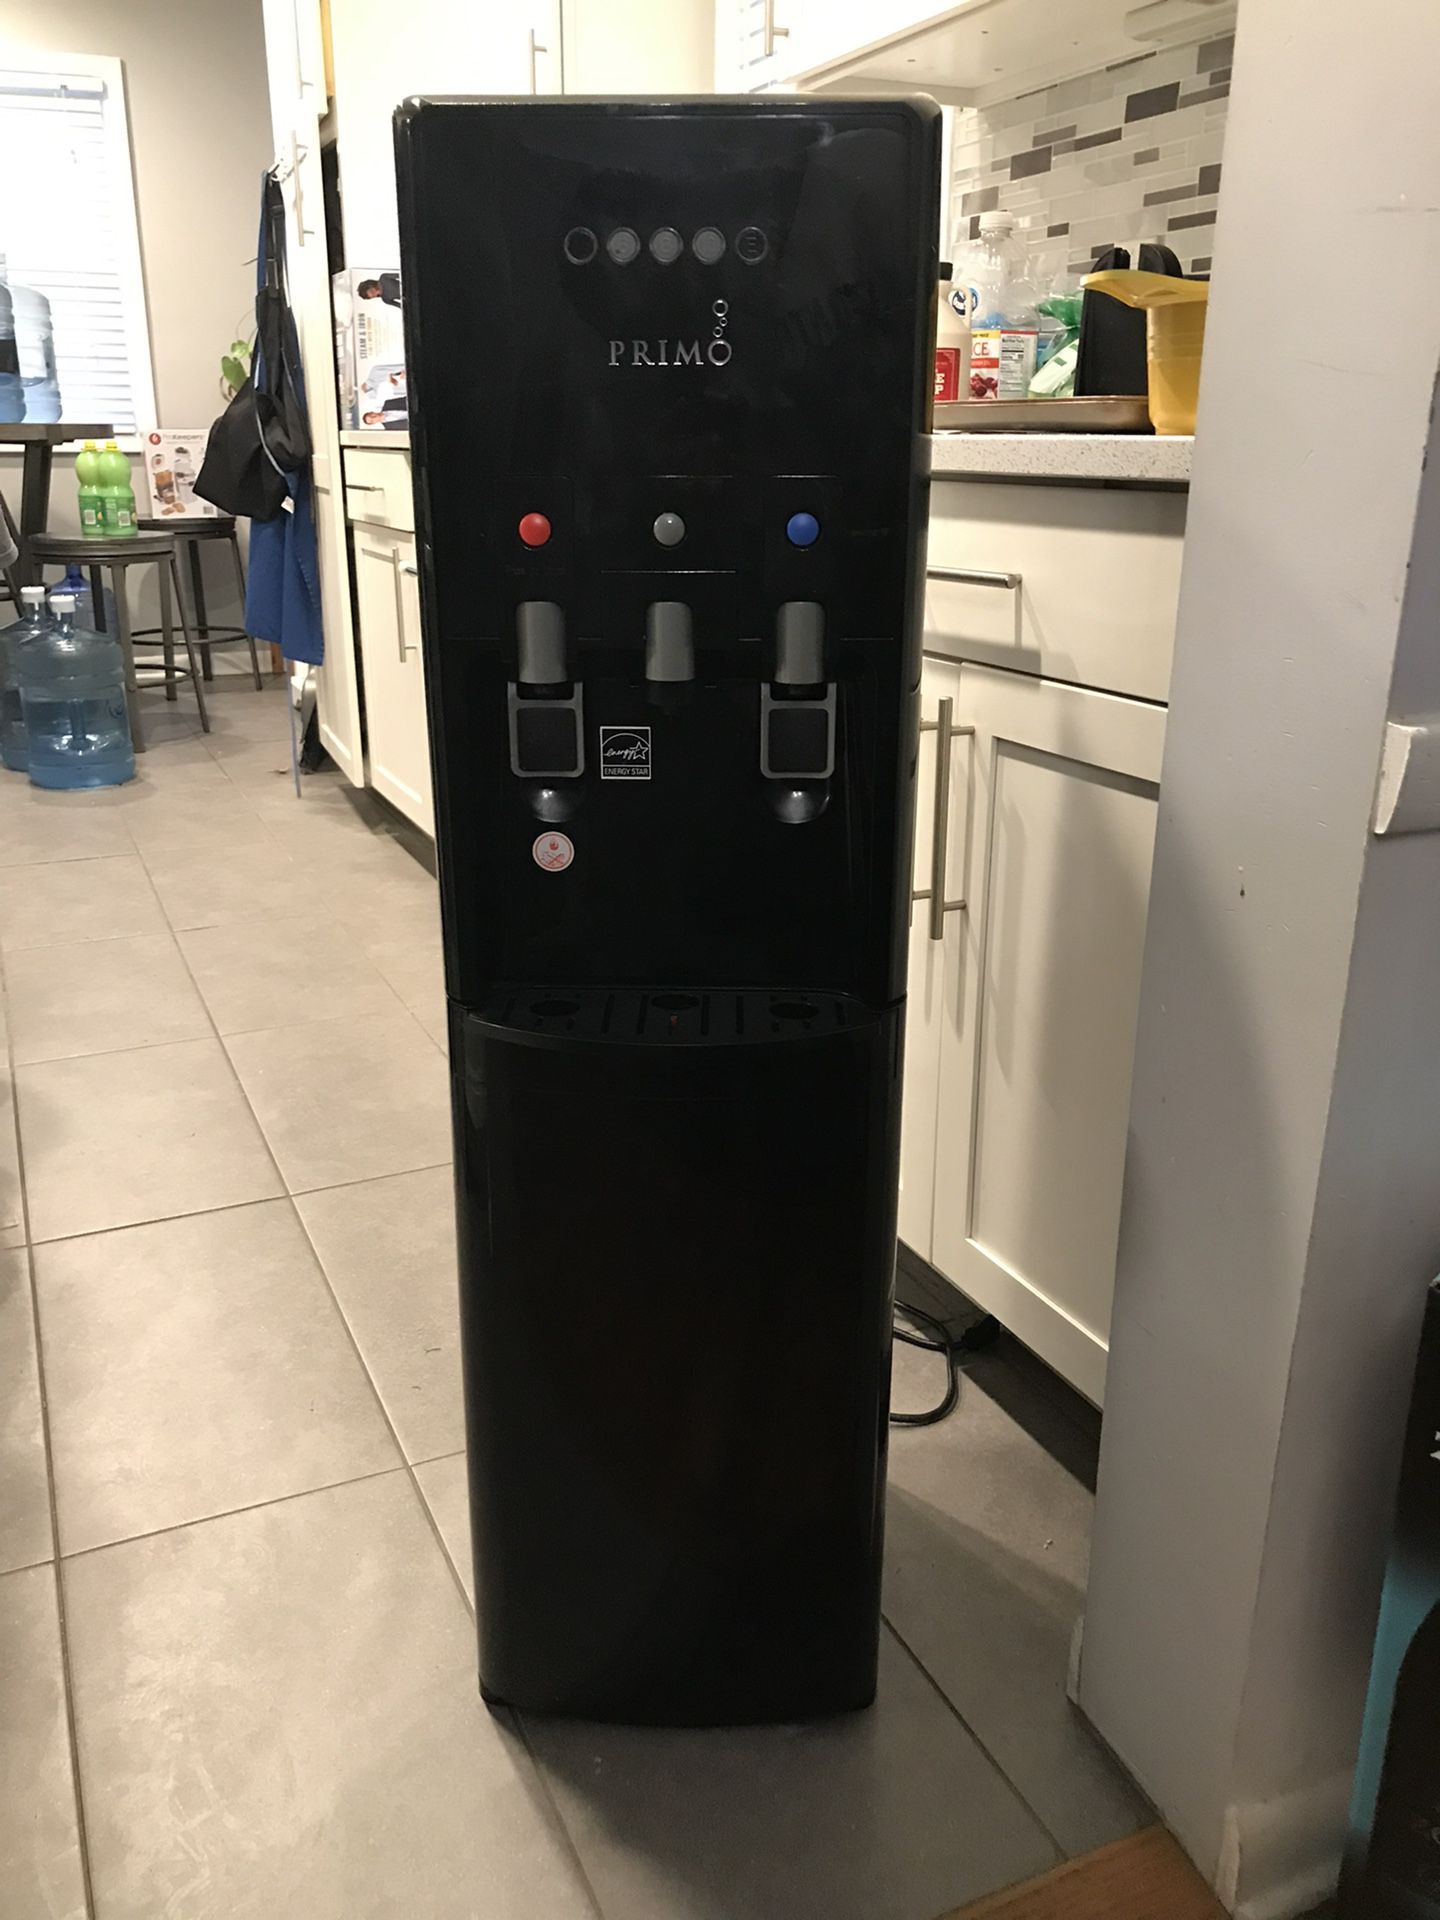 Primo Water Cooler - Hot And Cold